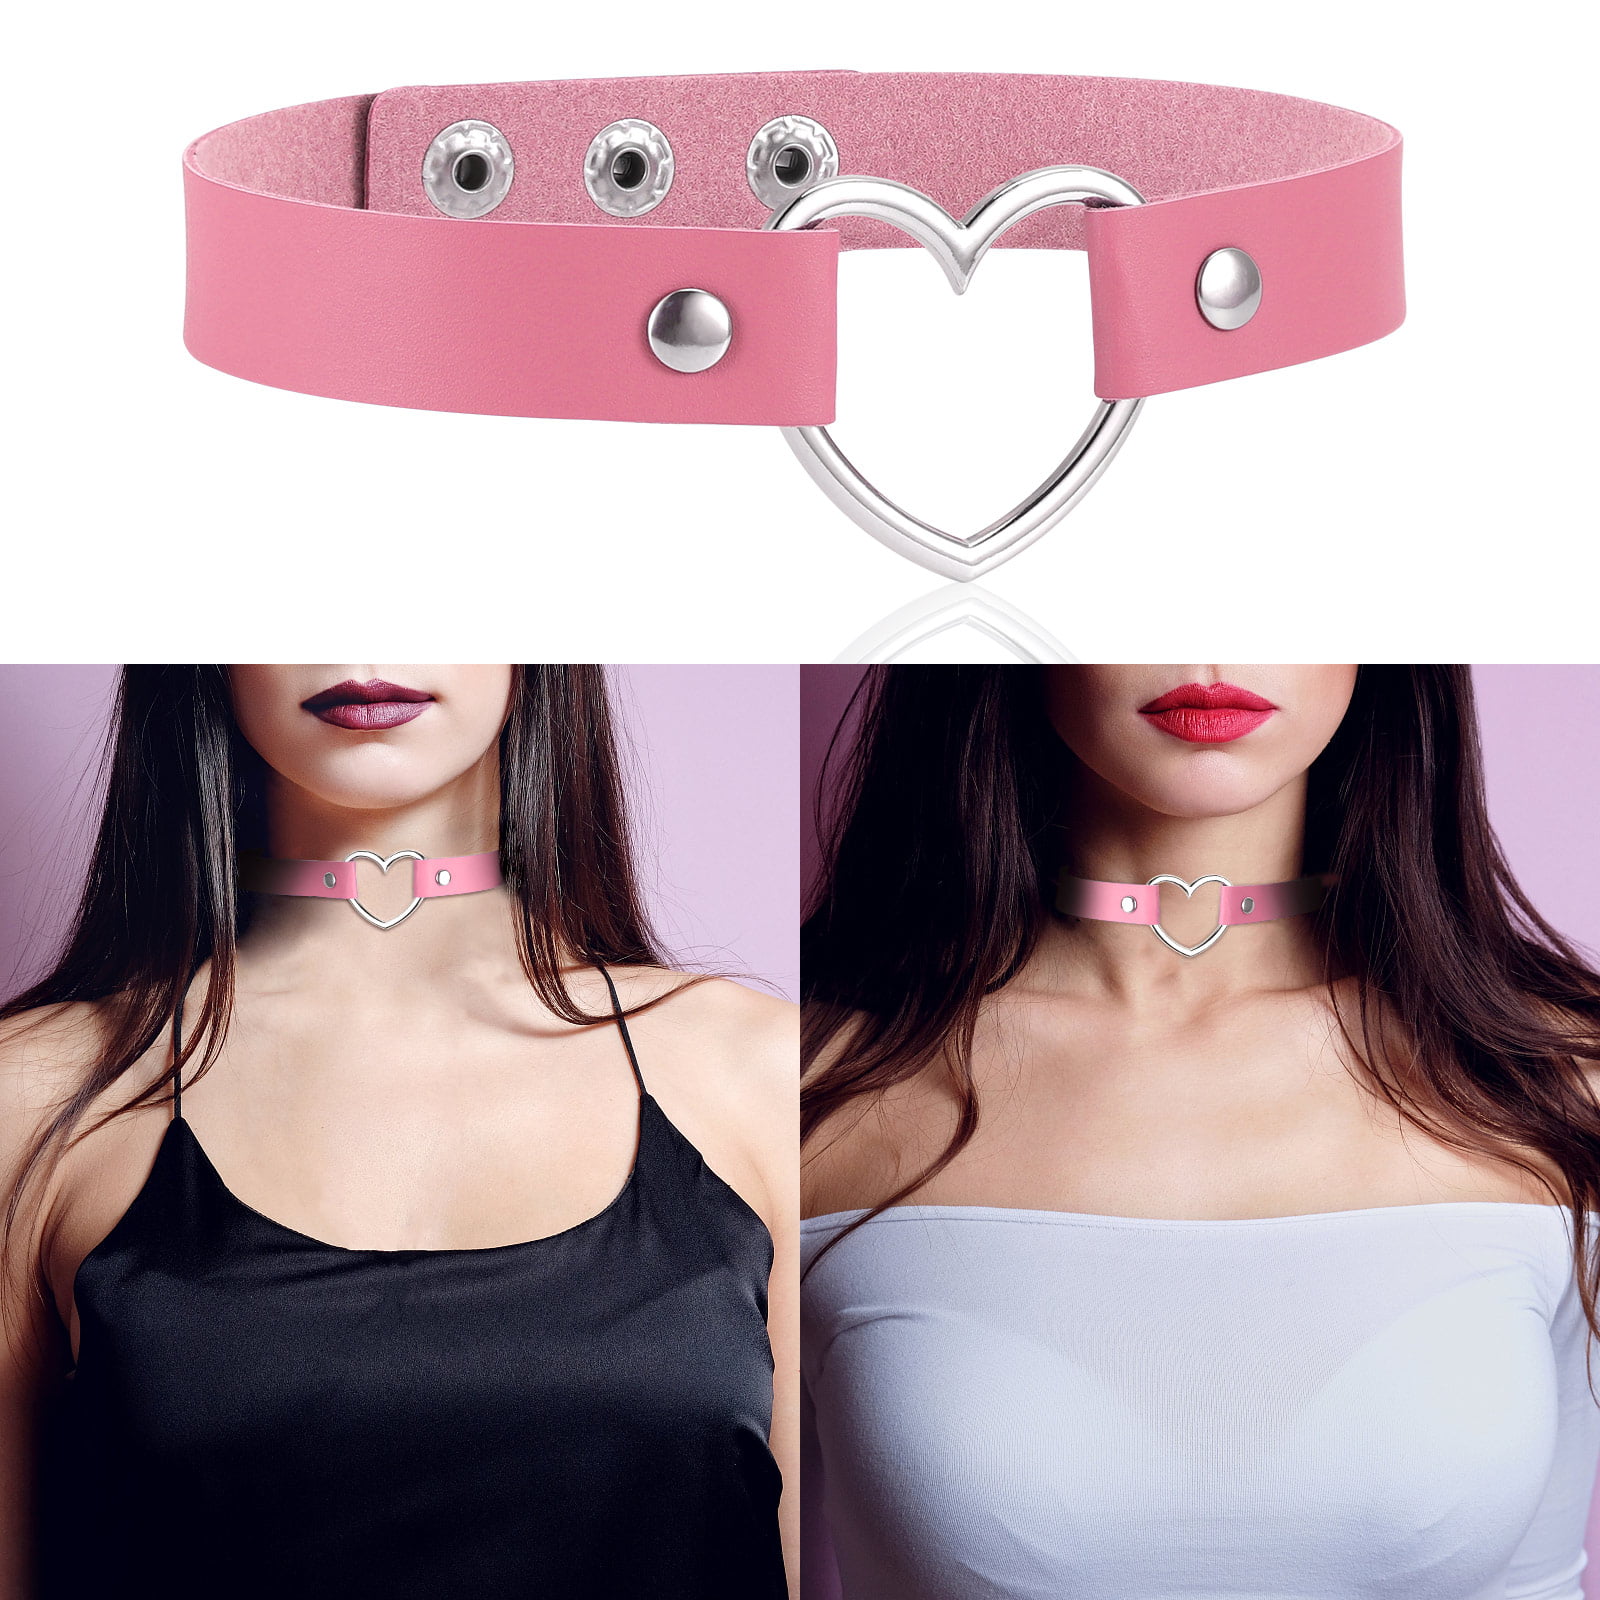 Asphire Cyber Punk Leather Choker Hollow Heart Collar Necklace Sexy Black  Geometric Choker Exaggerated Cosplay Party Jewelry Accessories for Women